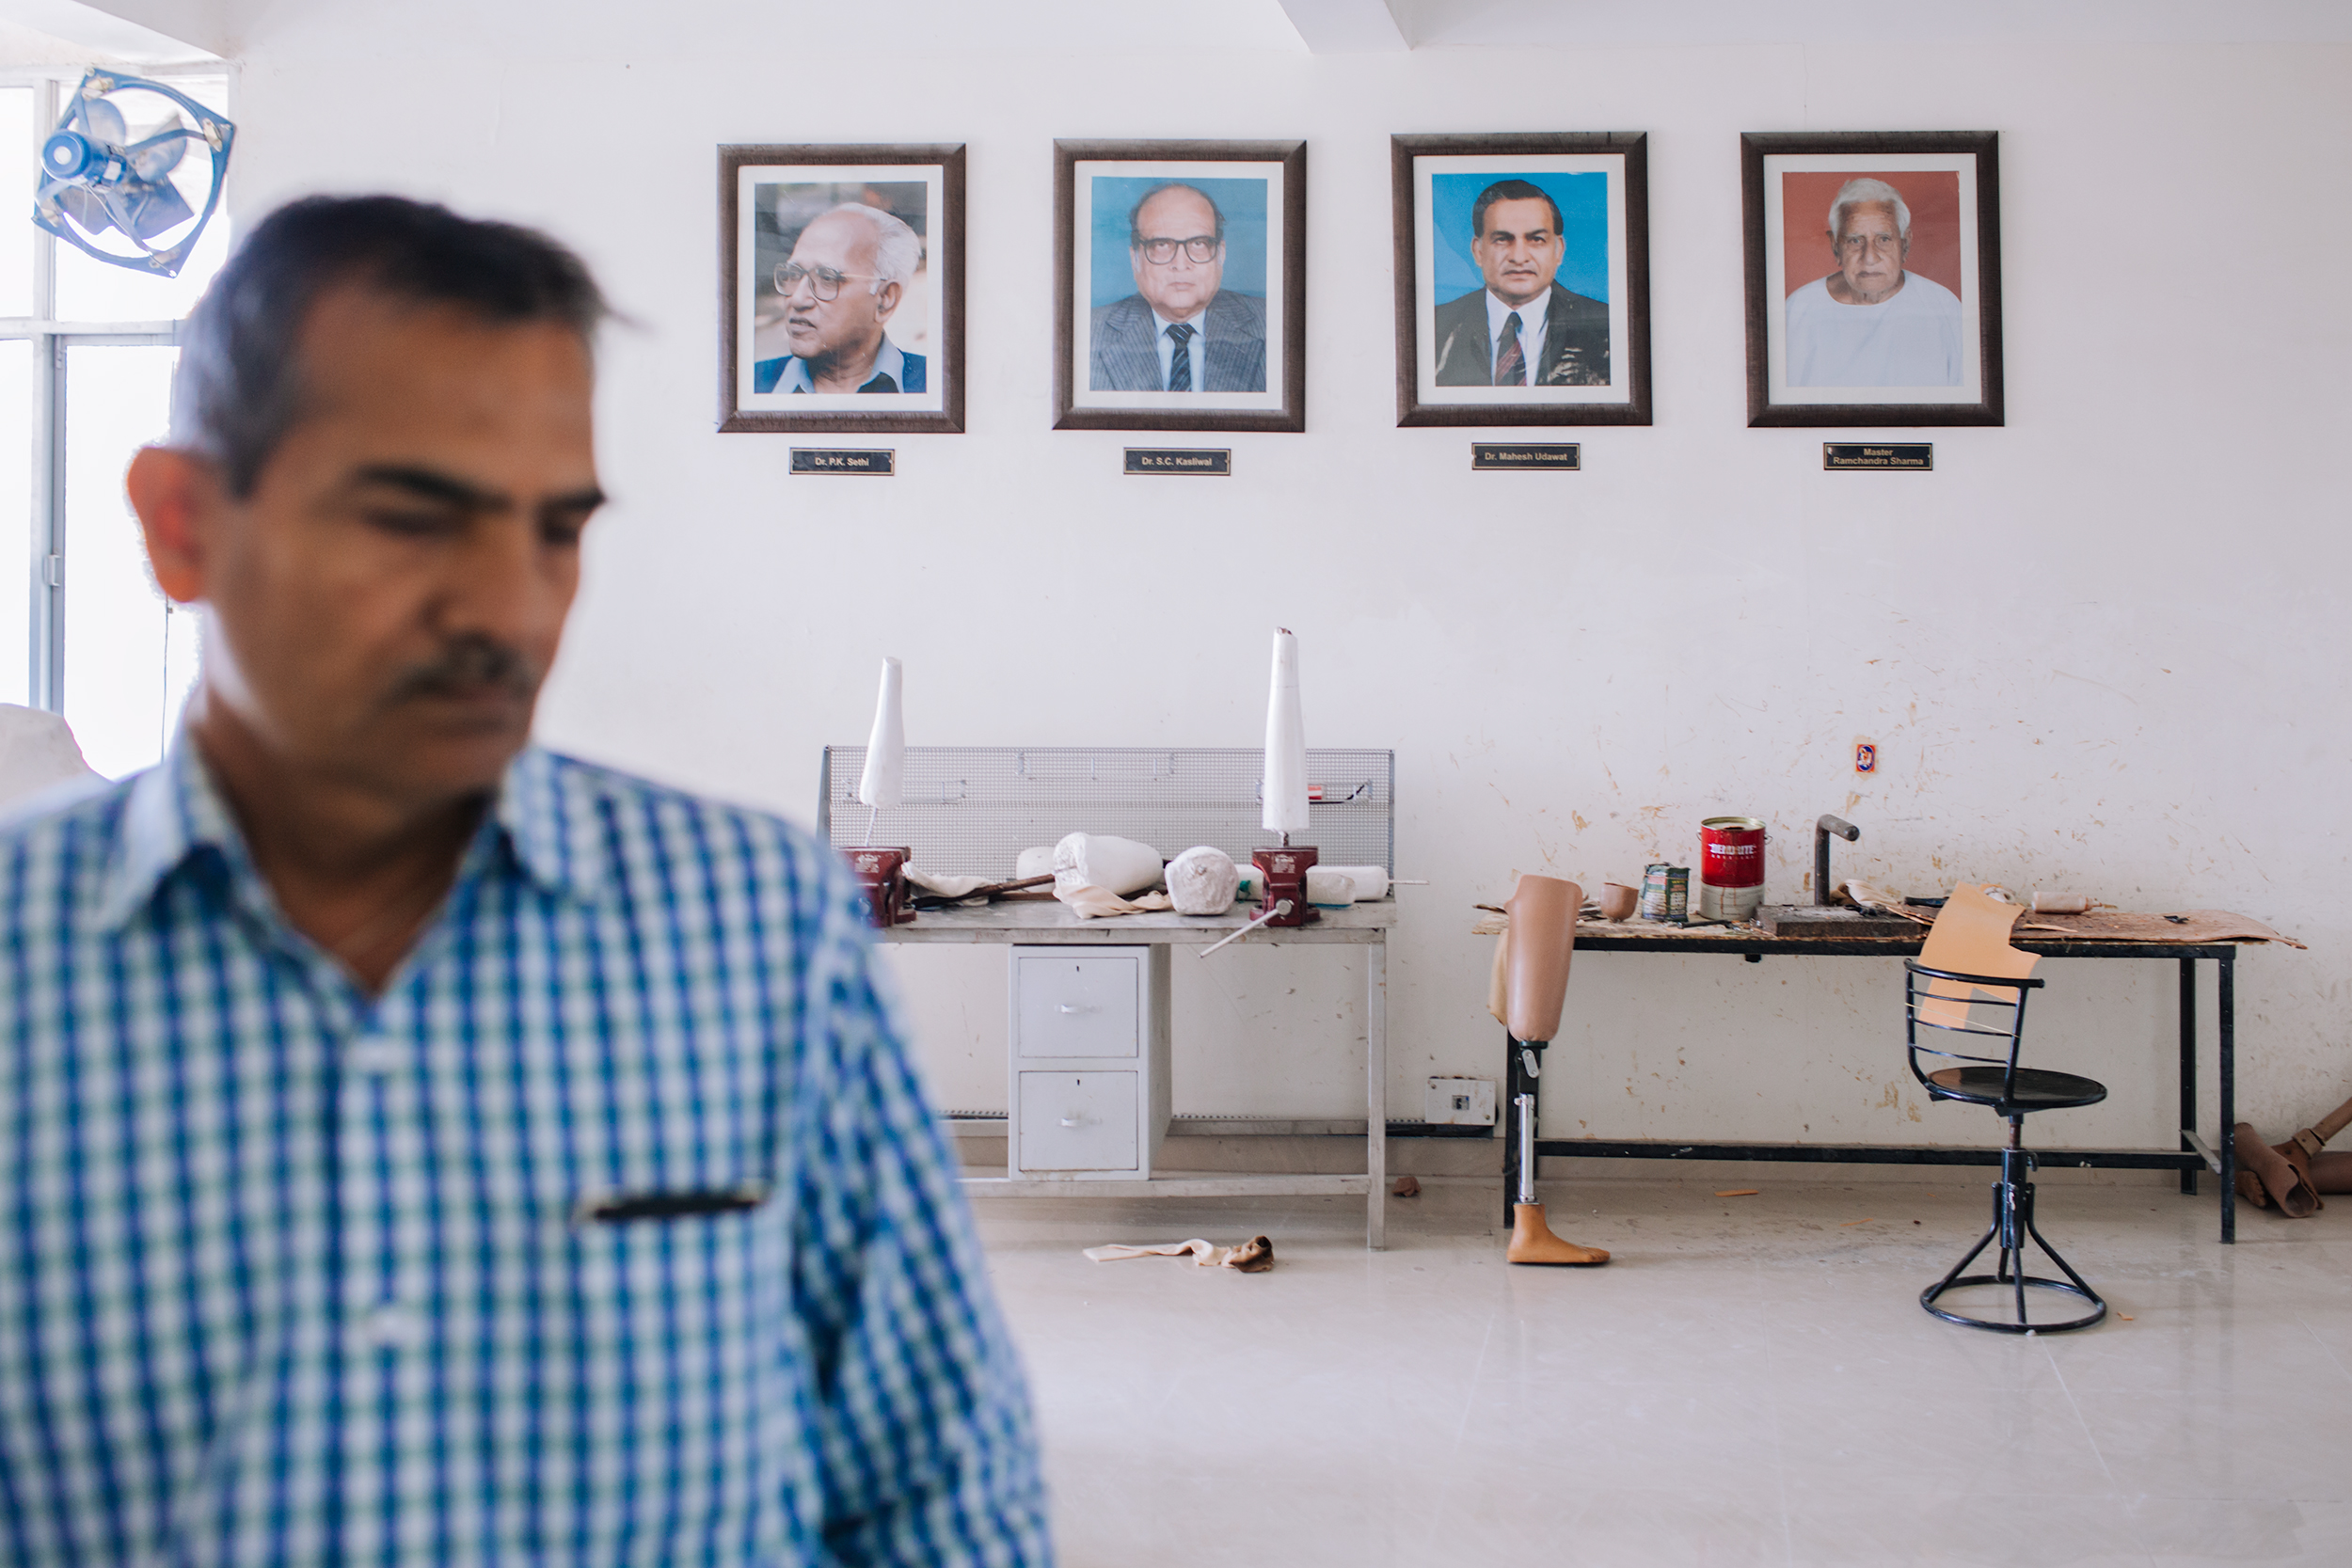  An intense collaboration between a sculptor Ramchandra Sharma, Dr. Sethi, Dr. Kasliwal and Dr. Udawat (their portraits hanging on the wall of BMVSS’s research facility) ignited the beginning of Jaipur Foot’s story. Their mission was to design a low-